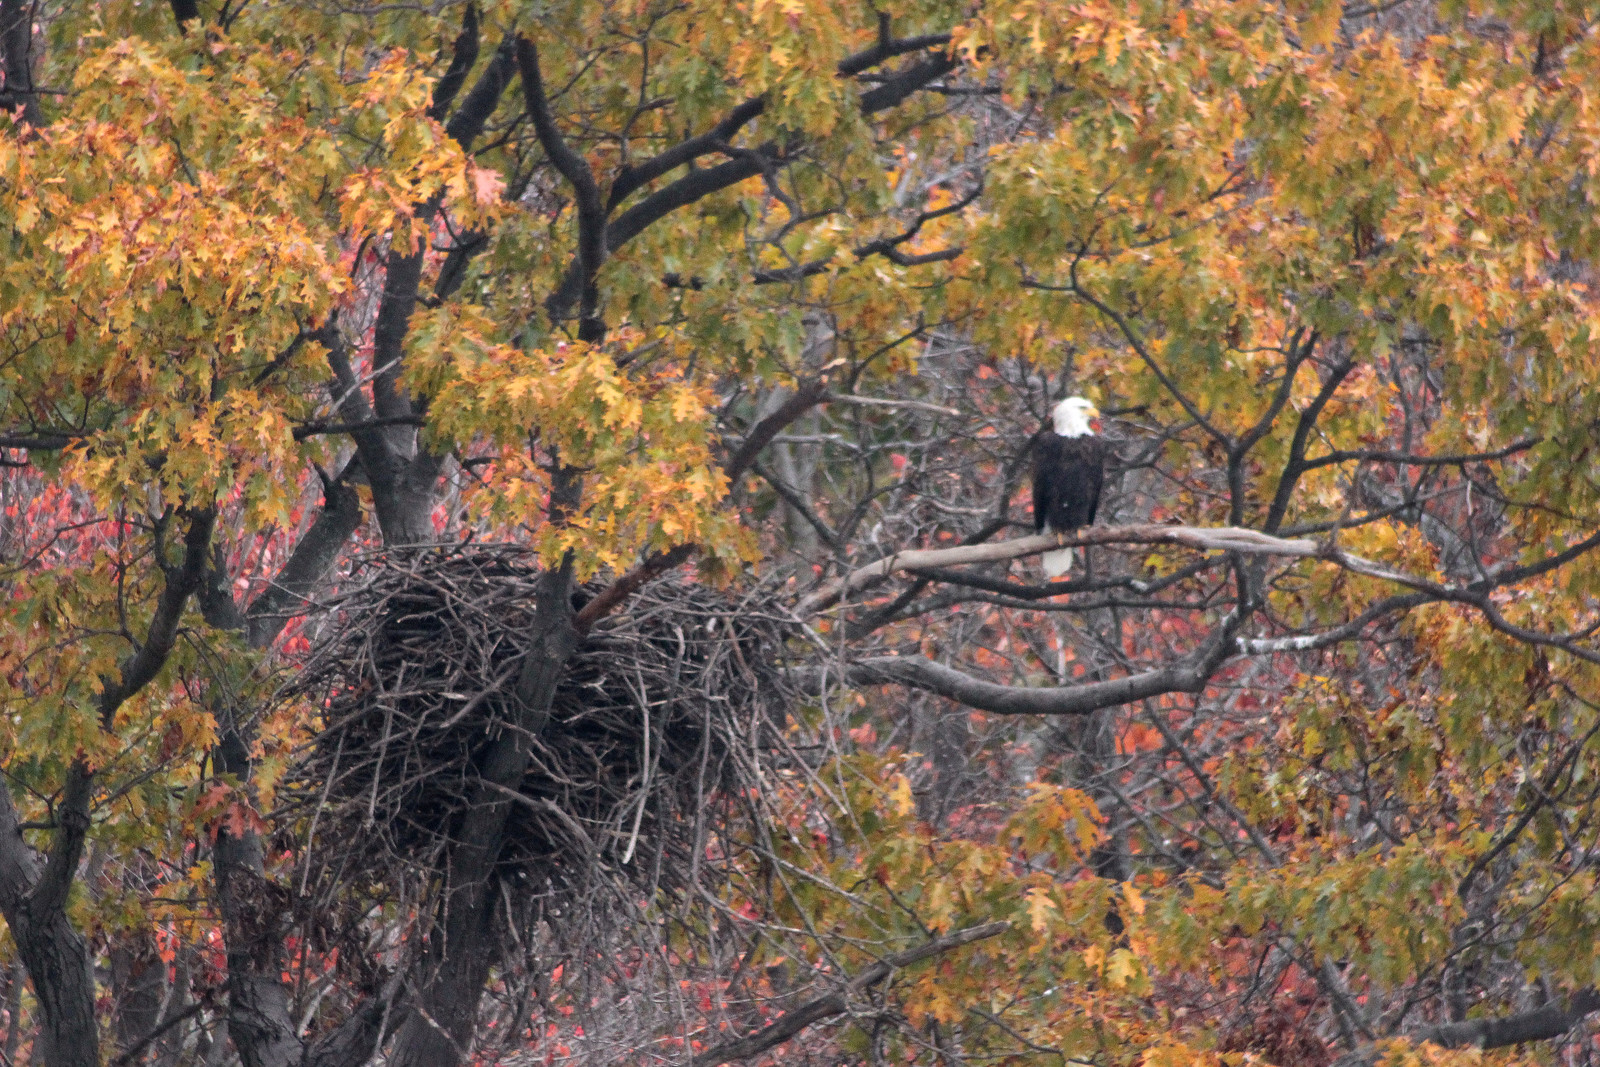 Bald eagle and eyrie | by fishhawk